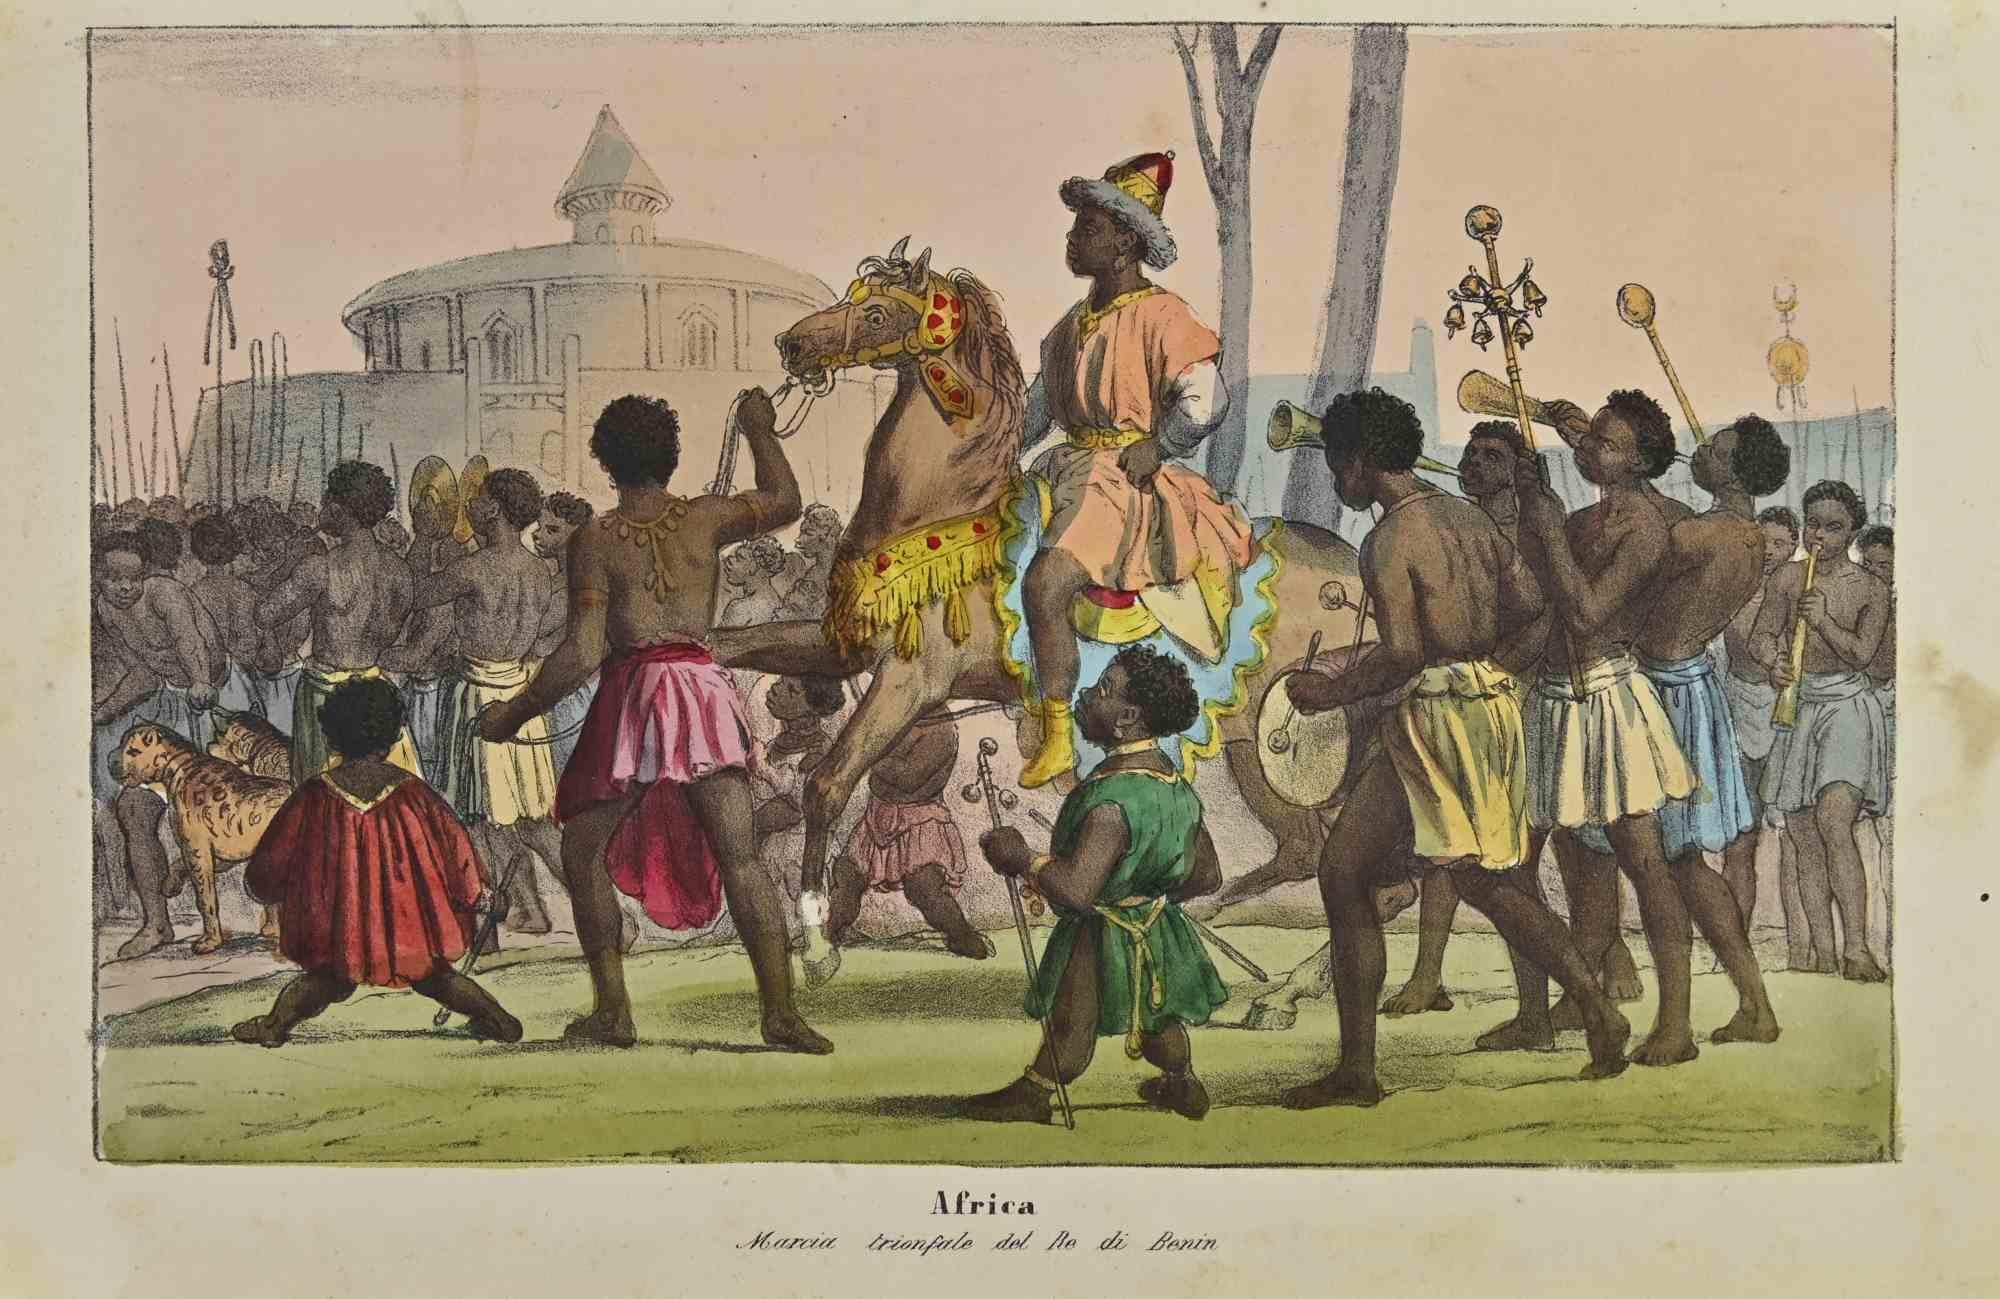 Africa is a lithograph realized by Auguste Wahlen in 1844.

Hand colored.

Good condition.

At the center of the artwork is the original title "Africa" and subtitle "Marcia trionfale del Re di Benin" (translated, "Triumphal March of the King of